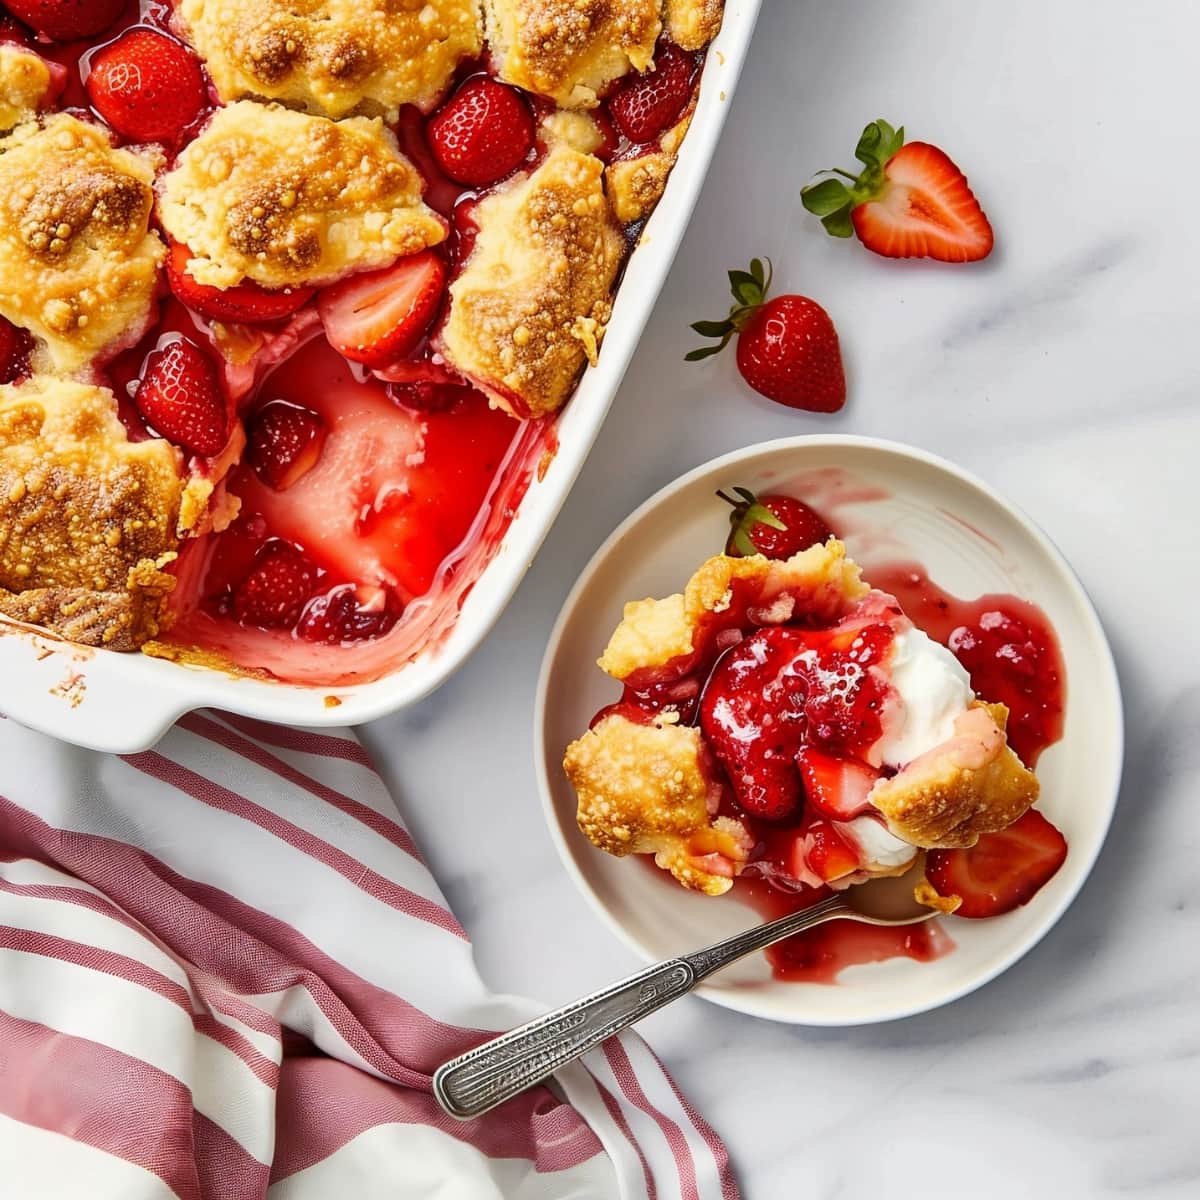 A piece of strawberry cobbler in a plate with a baking casserole dish on the side